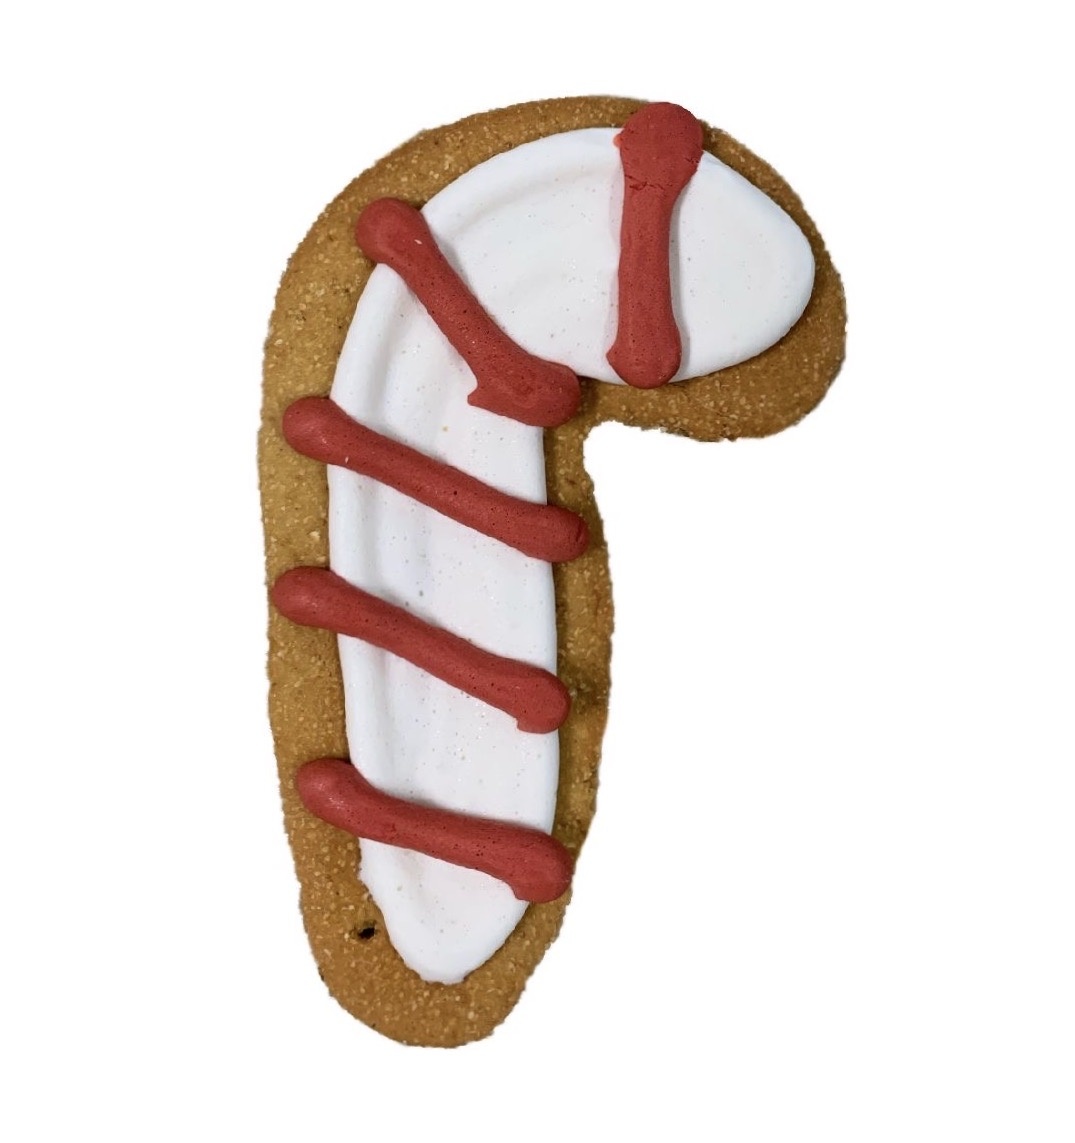 Bone Bons Candy Cane Bakery Cookie 3"